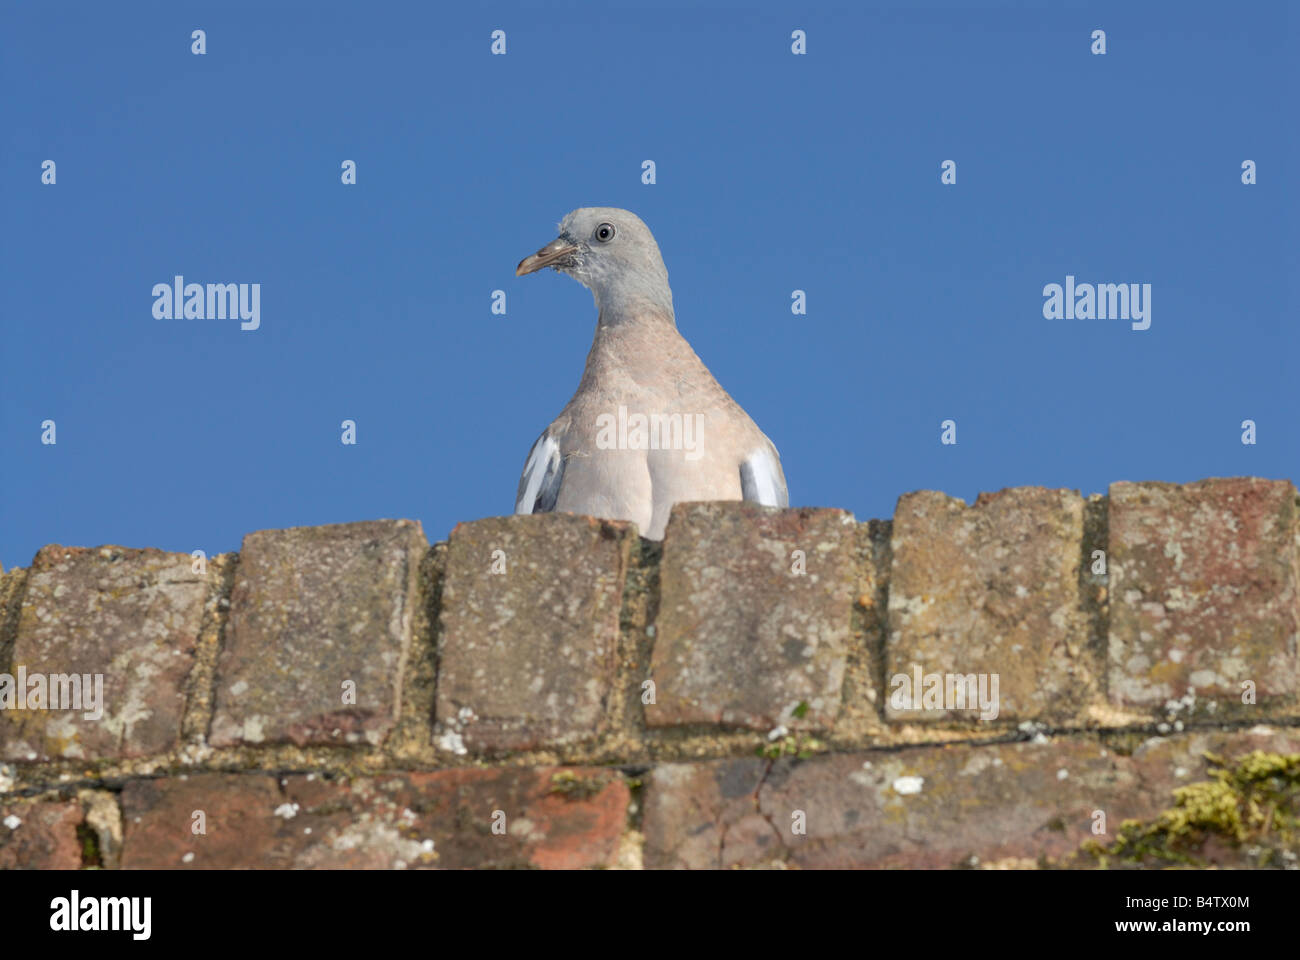 A pigeon peeping from its perch on a wall Stock Photo